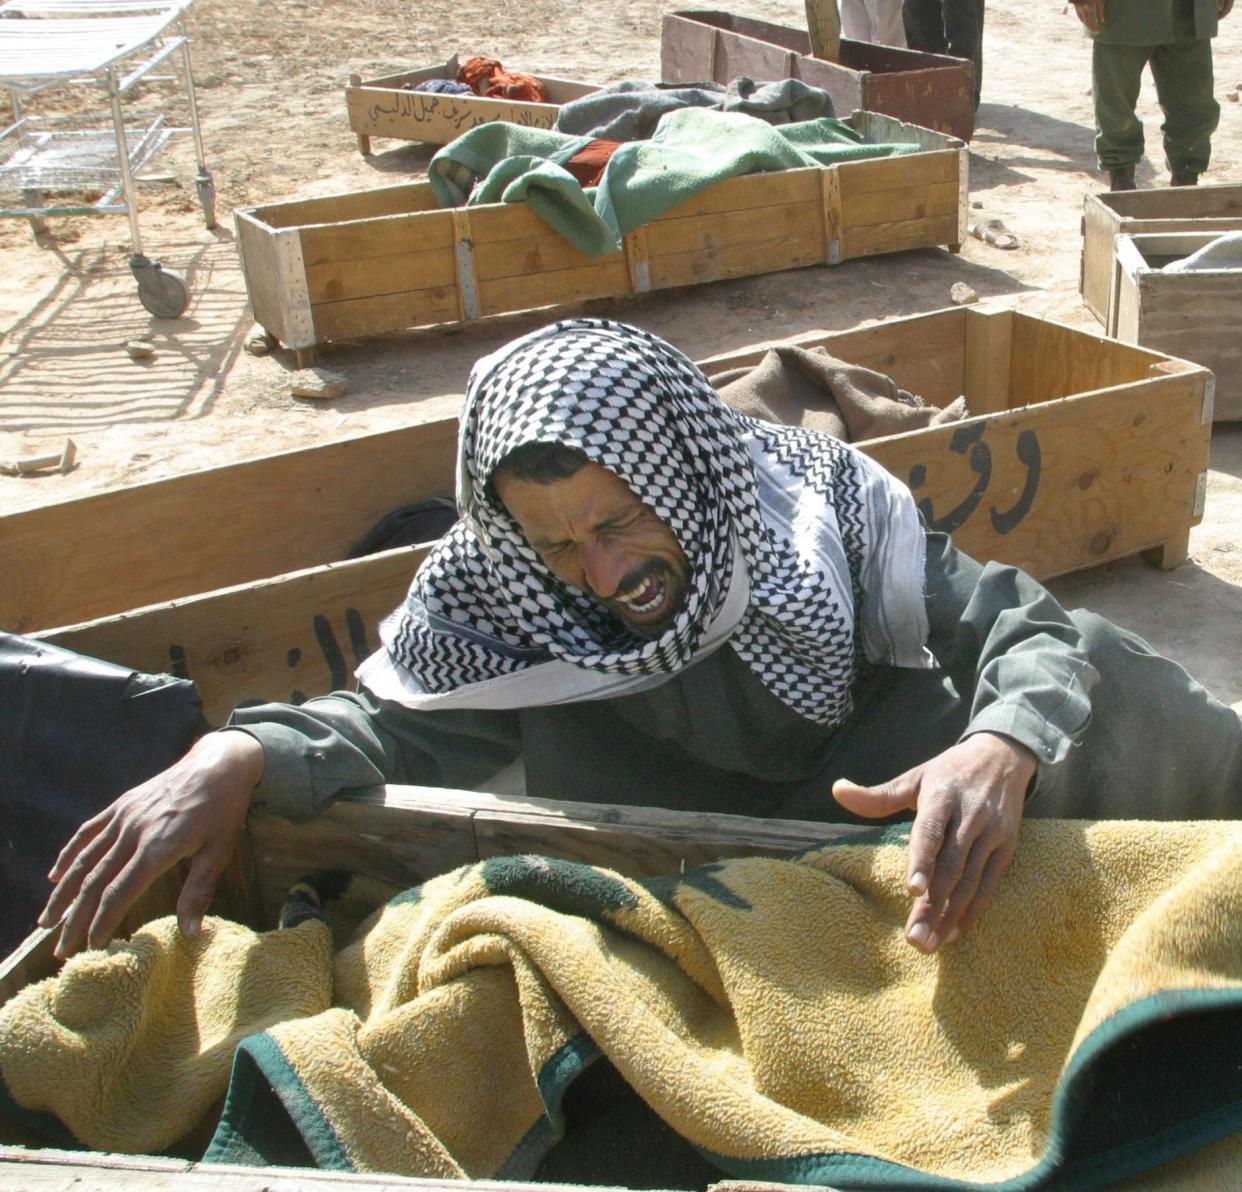 Razzaq Kazem al-Khafaj grieves over the body of his mother in Hilla in the southern province of Babylon on April 1, 2003. Khafaj lost 15 members of his family including six children, as his car was bombed by coalition helicopters while fleeing al-Haidariyeh towards Babylon. Thirty-three civilians were killed and 310 wounded in a U.S.-British coalition bombing of the residential area of Nader south of the city of Hilla, 50 miles south of Baghdad.